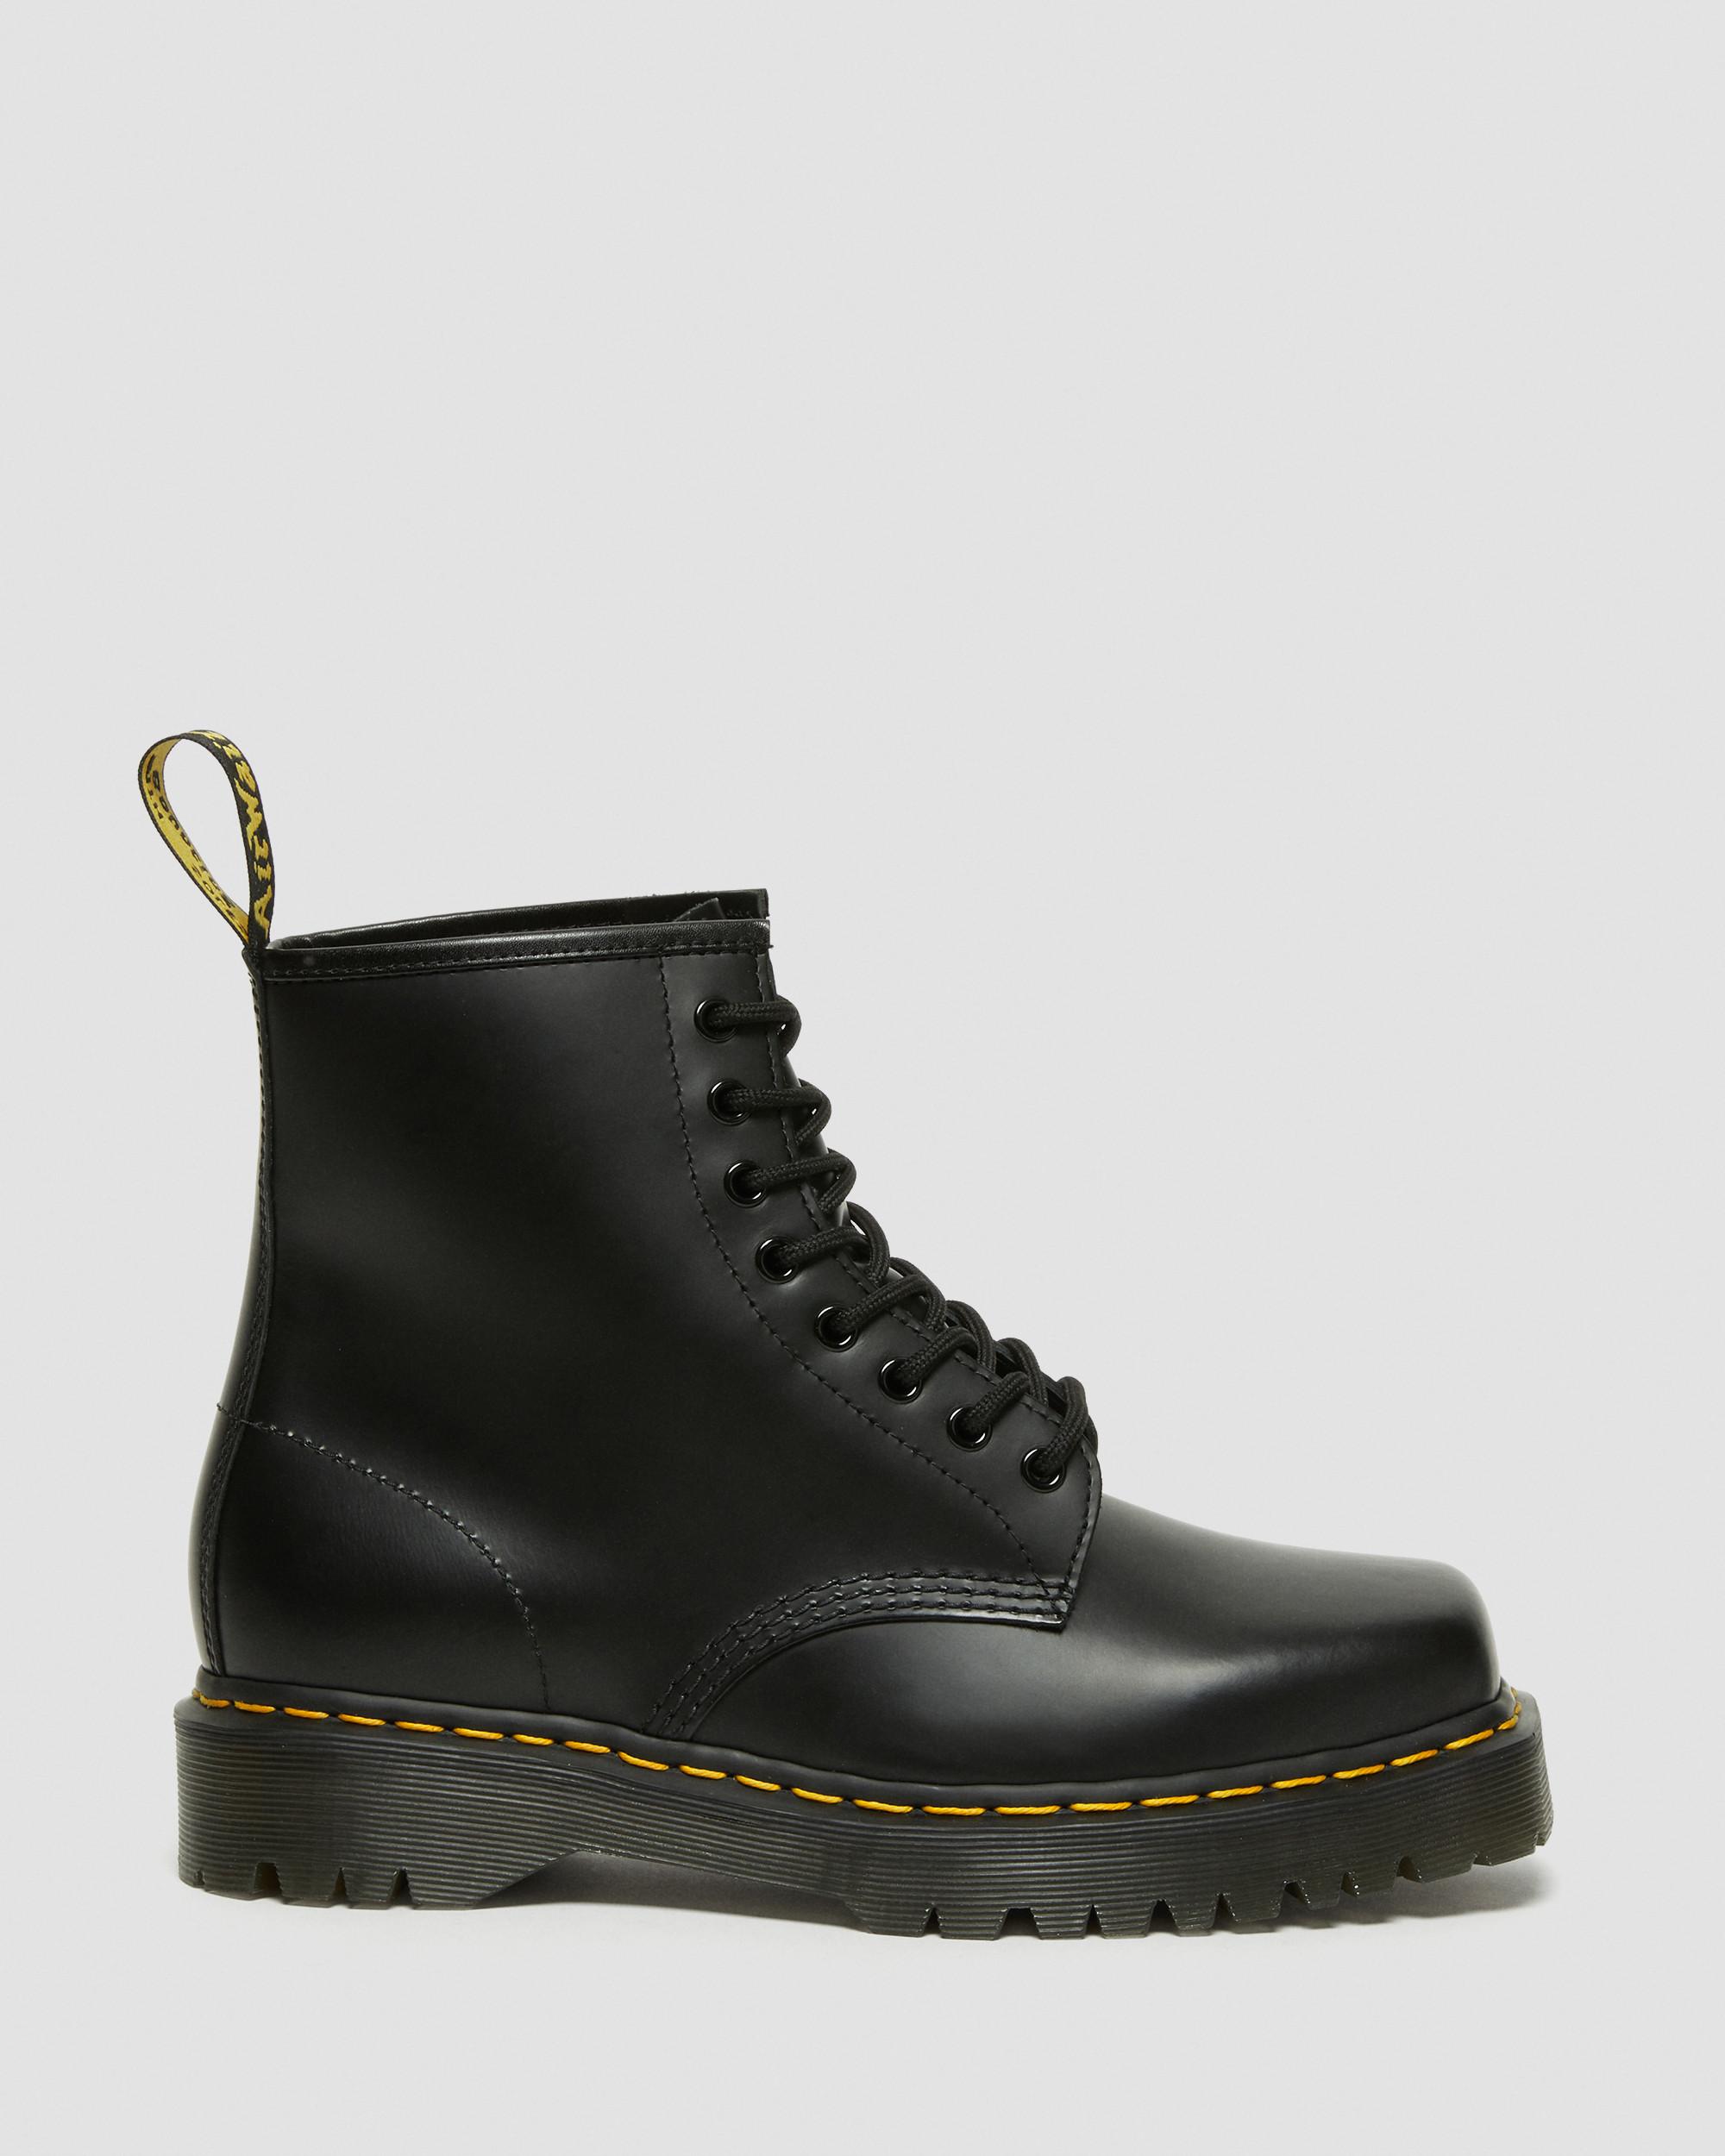 1460 Bex Squared Toe Leather Lace Up Boots, Black | Dr. Martens